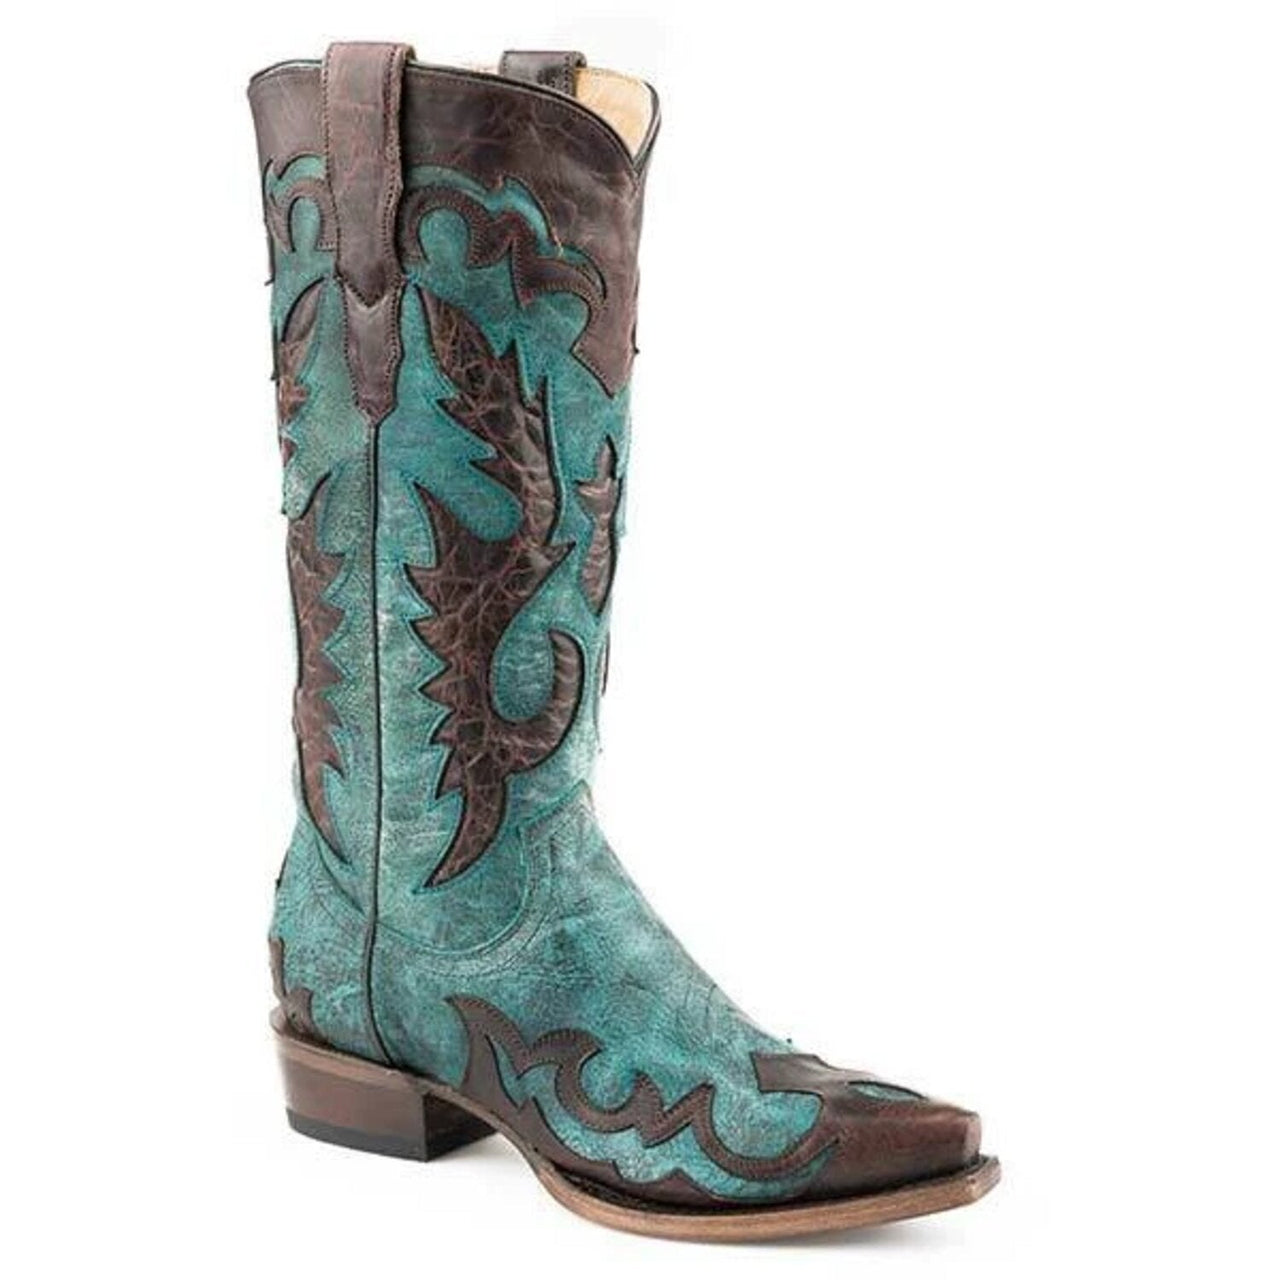 Women's Stetson Cora Leather Boots Handcrafted Blue - yeehawcowboy